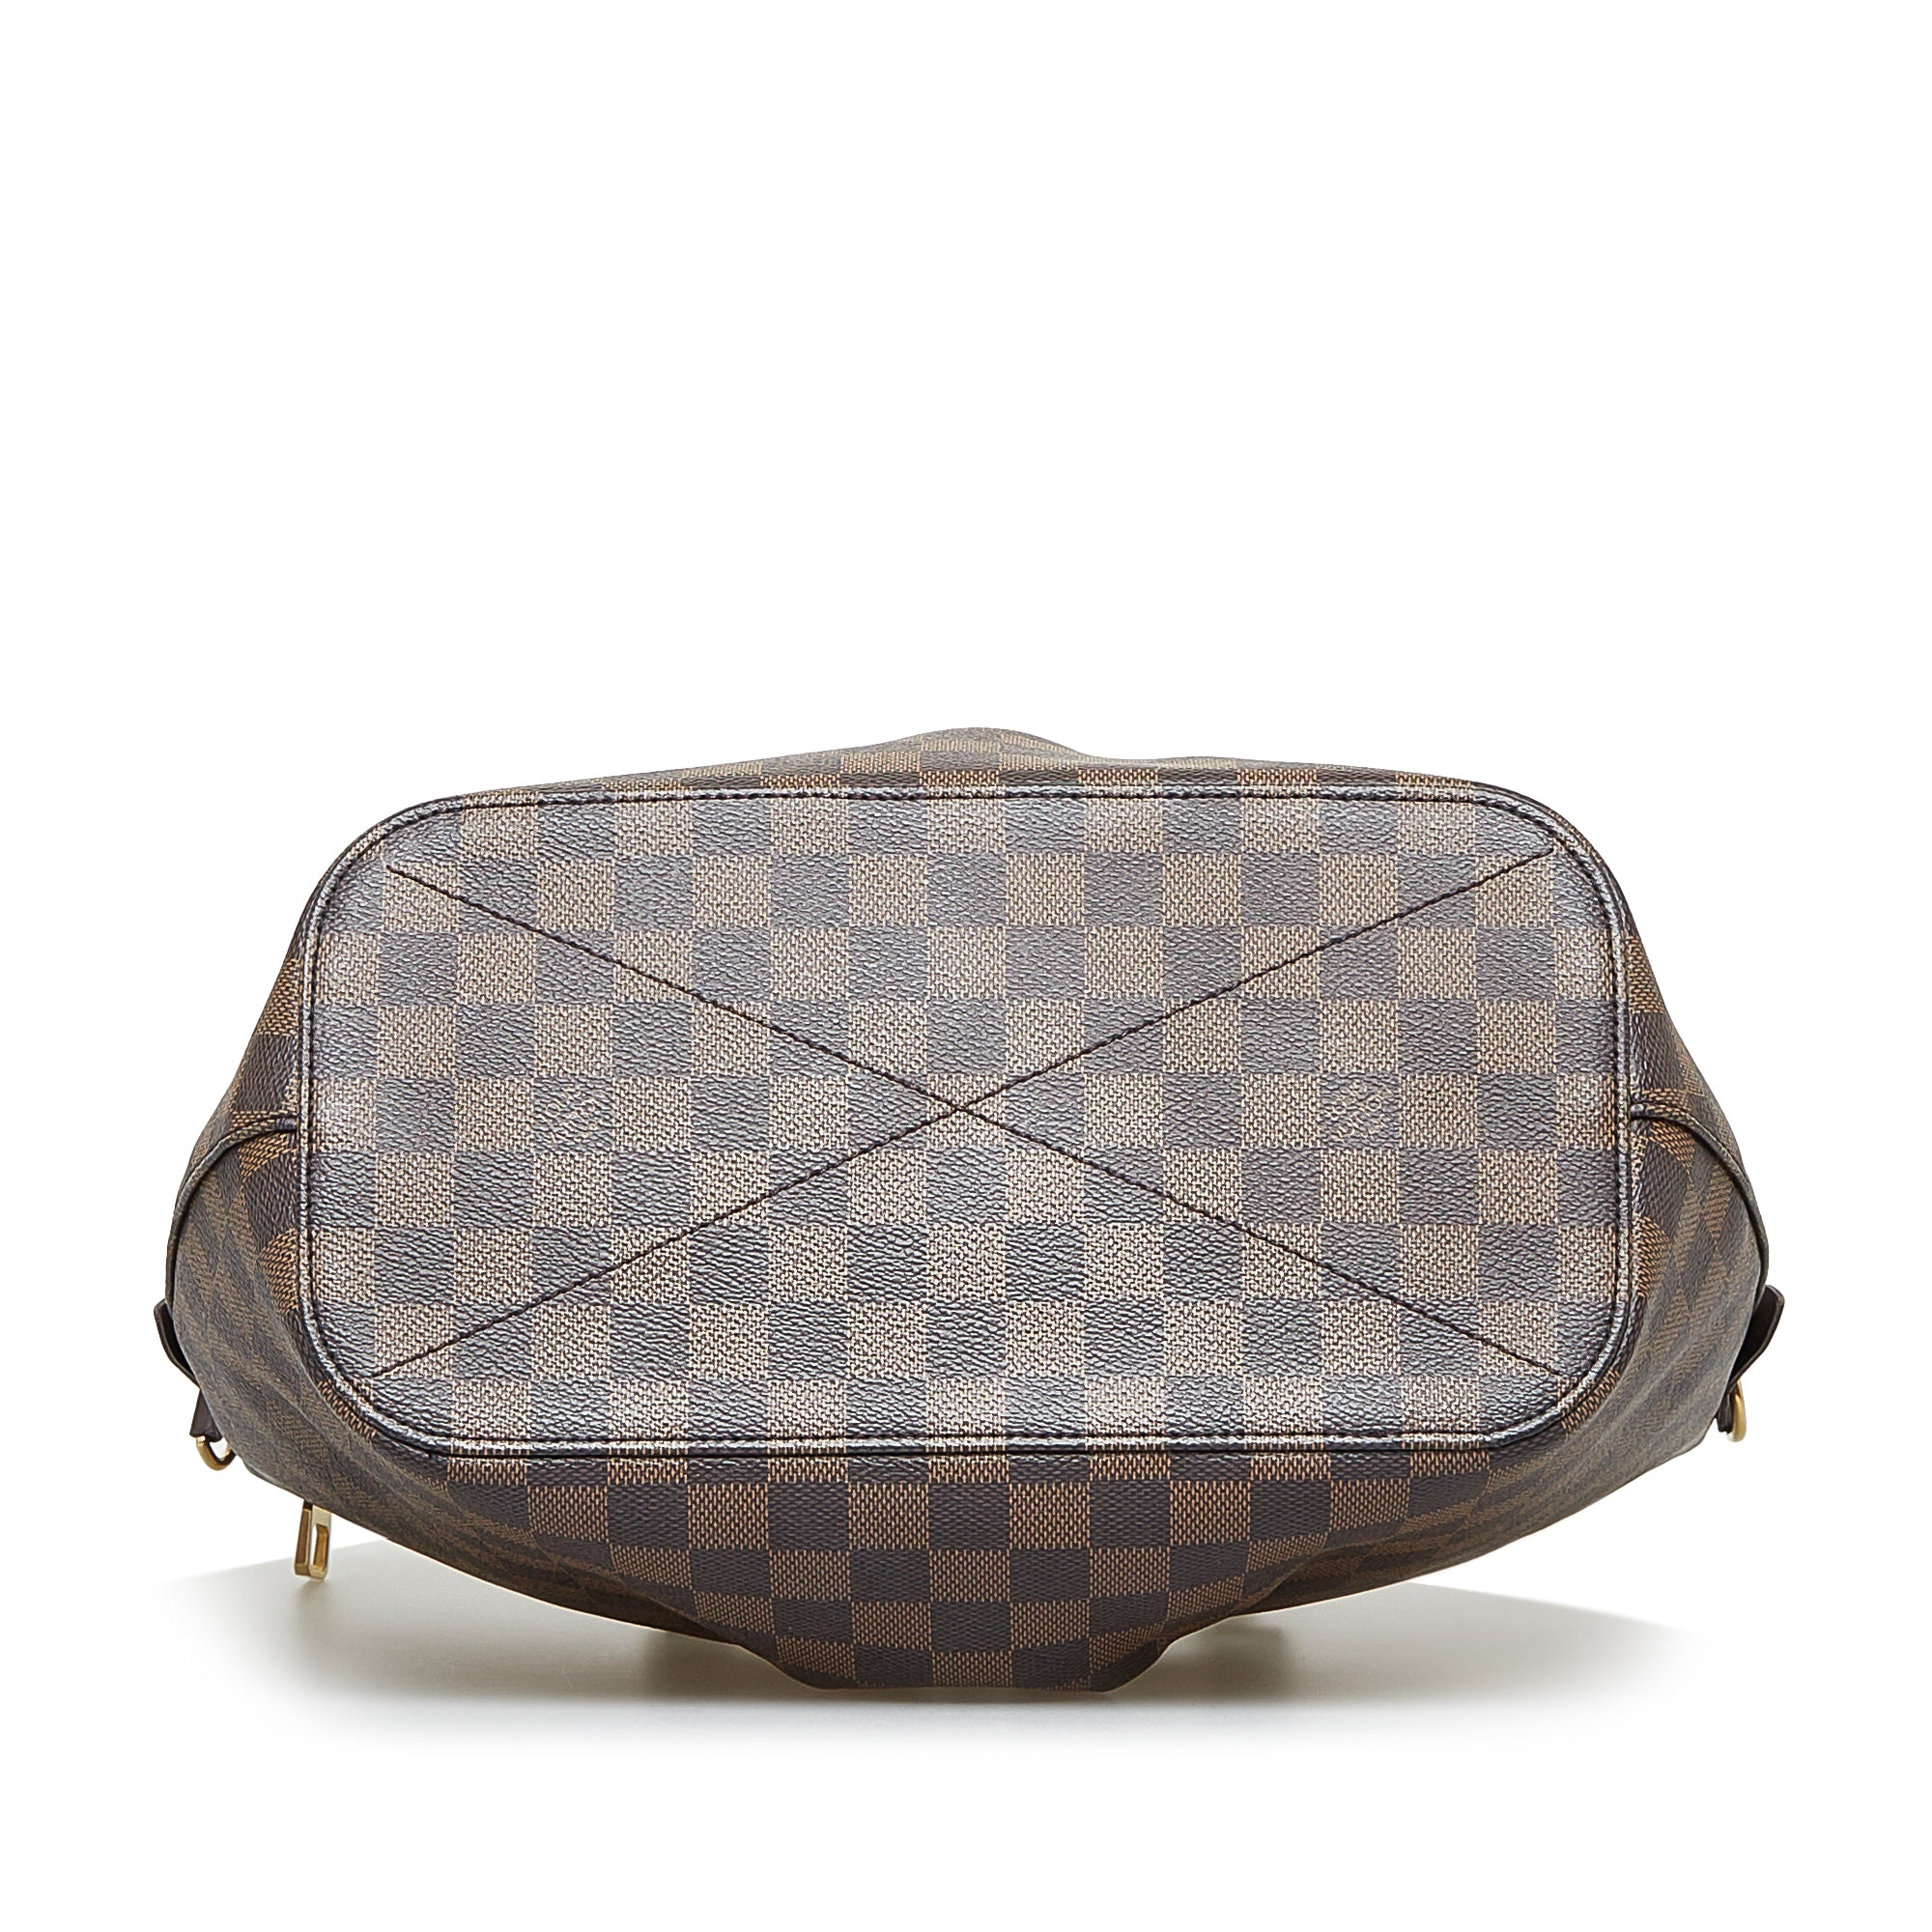 Louis Vuitton Siena Damier Ebene MM Brown in Canvas/Leather with